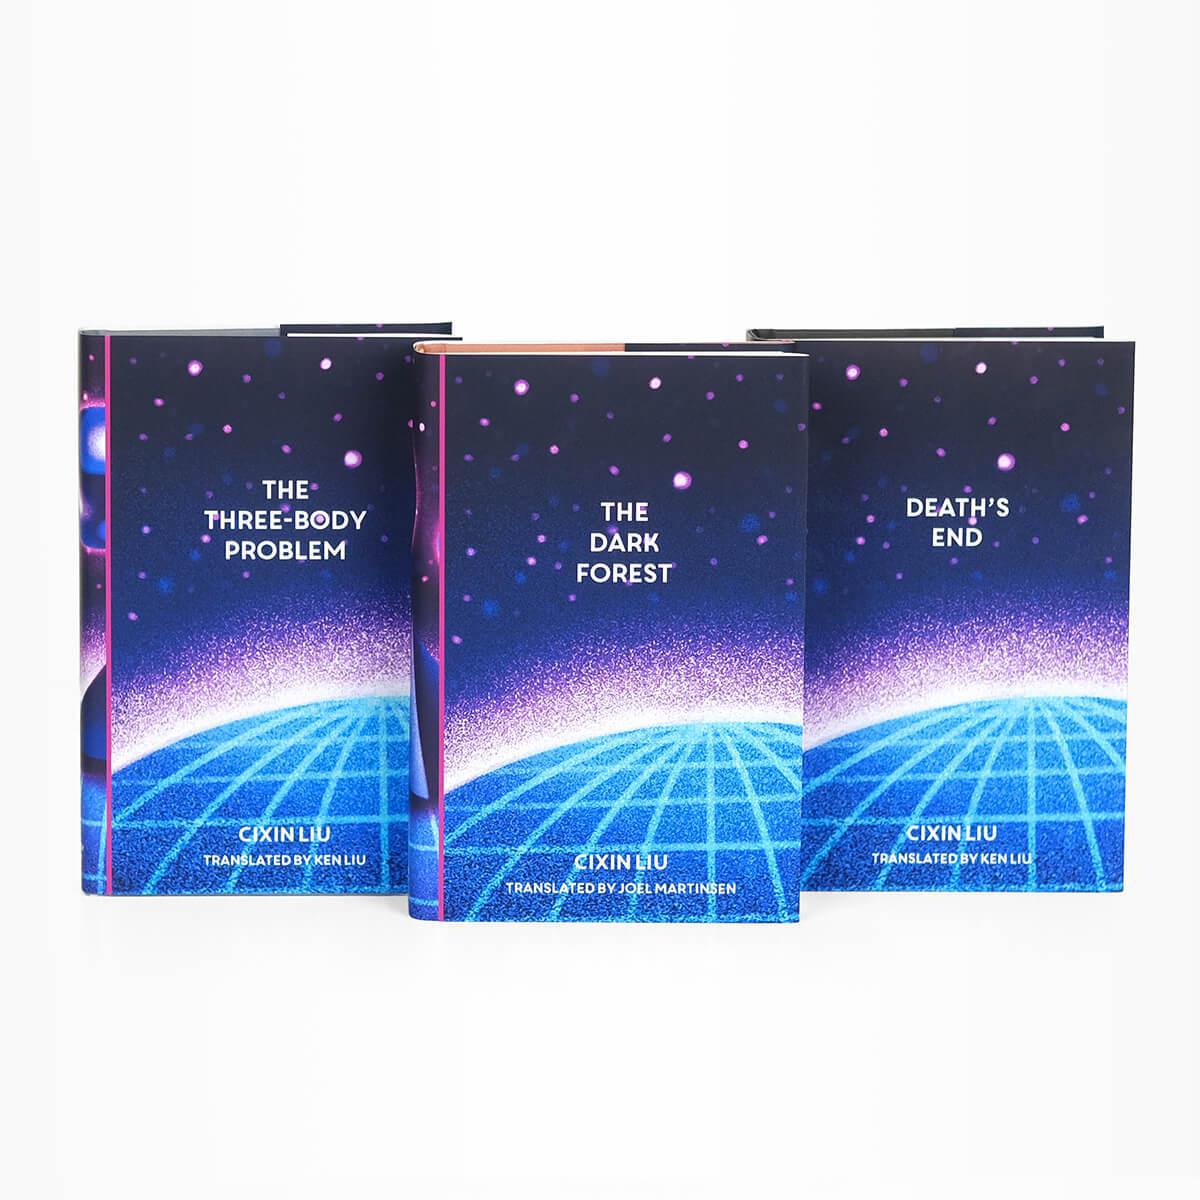 Dust jacket covers features pink texture and particles floating on blue background with a edge of a blue circle with longitude latitude lines running across it. Book title and author typed across cover in bold white serif type.